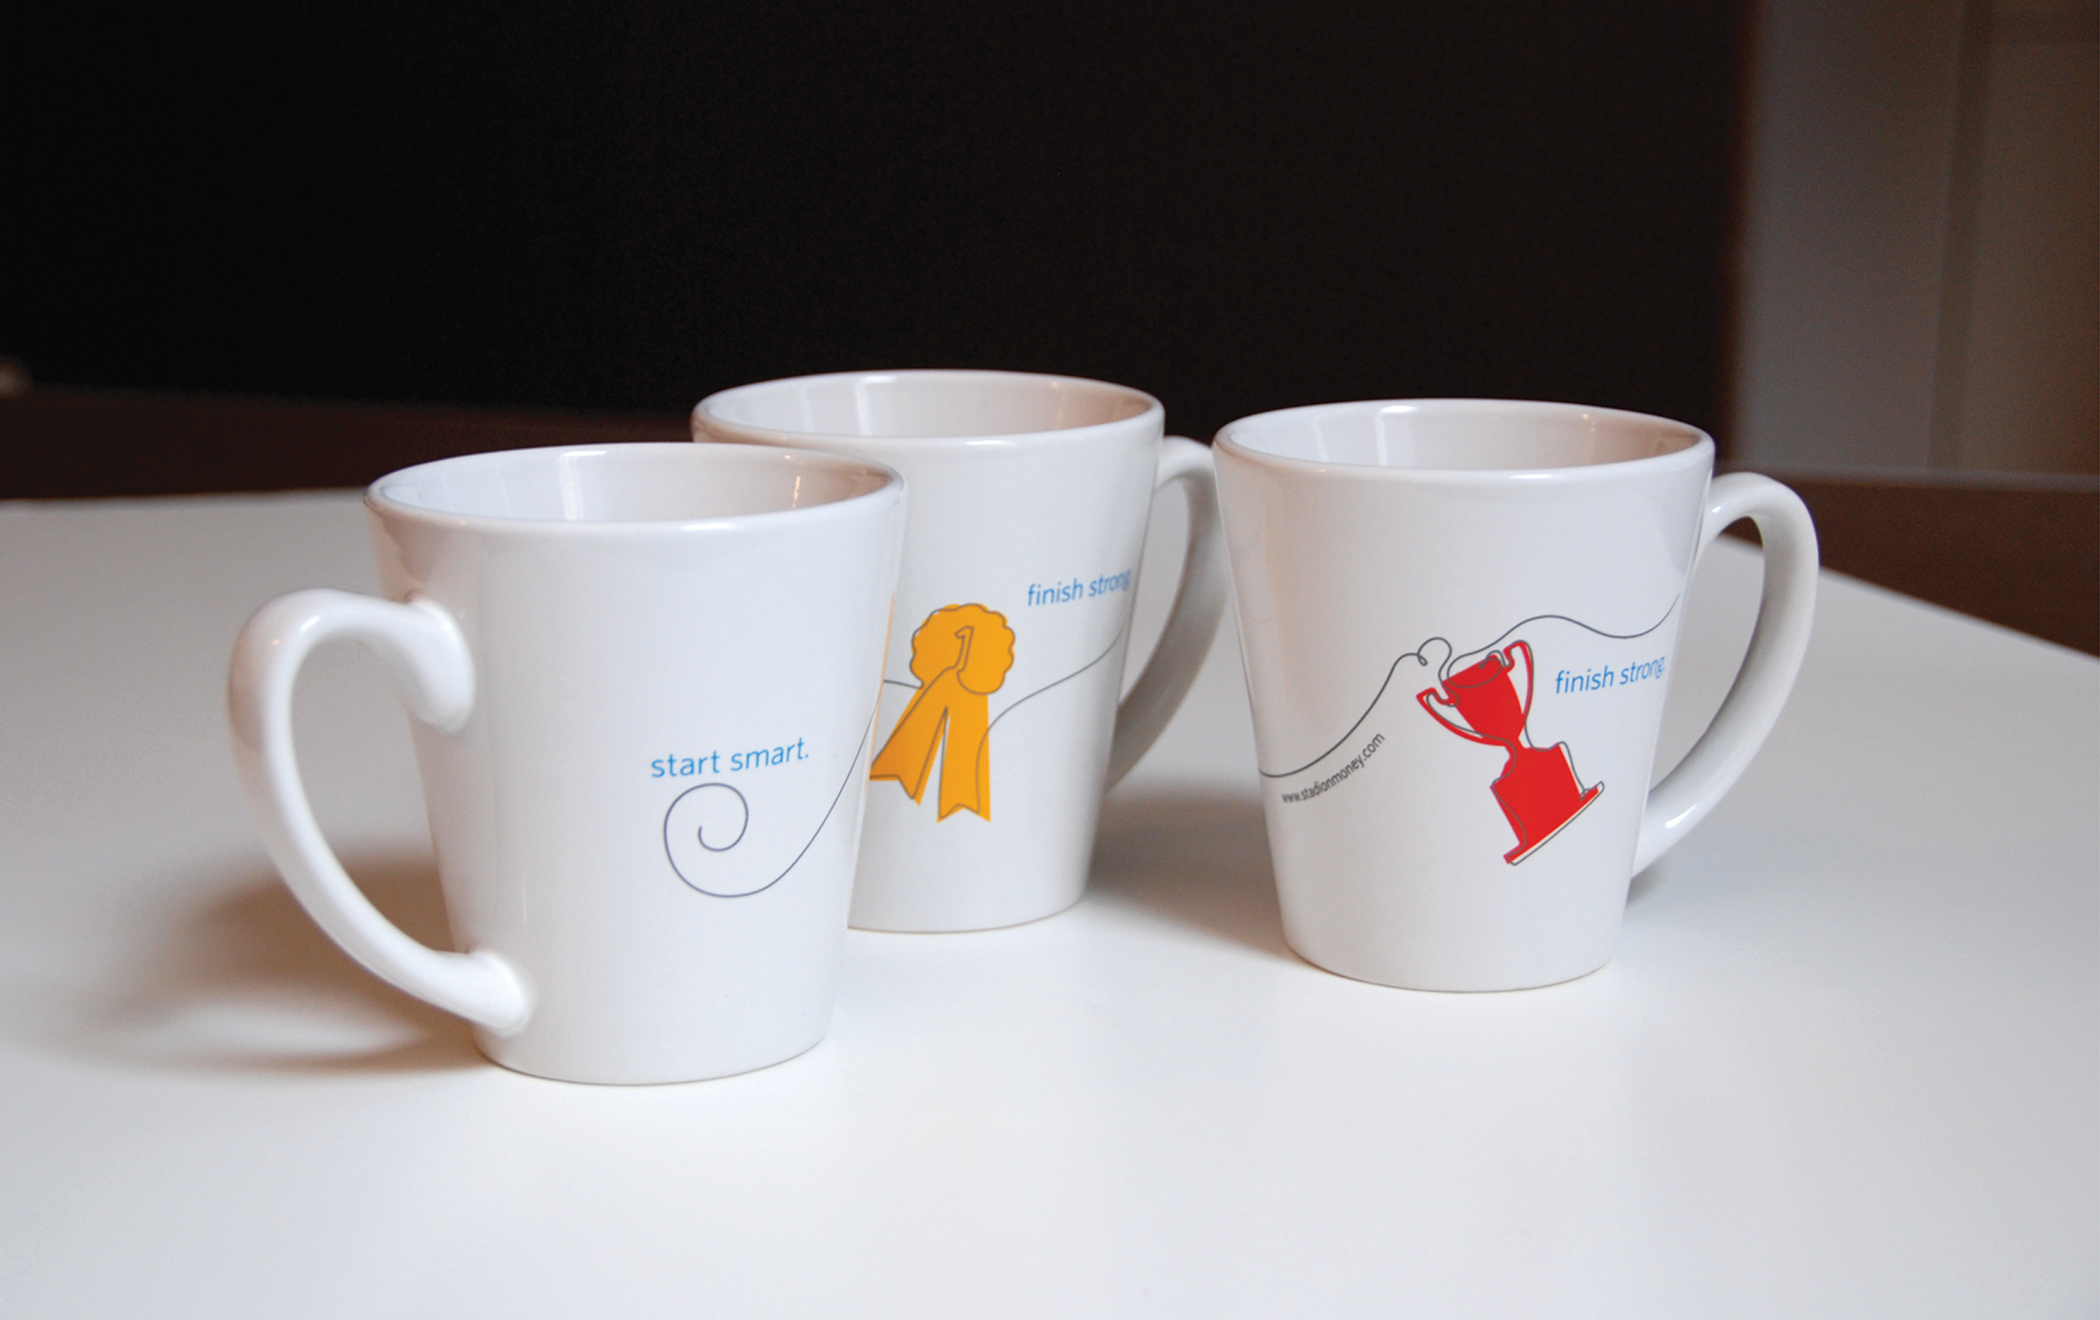 Stadion-branded coffee cups with brand illustrations and the tagline, "Start smart, finish strong."